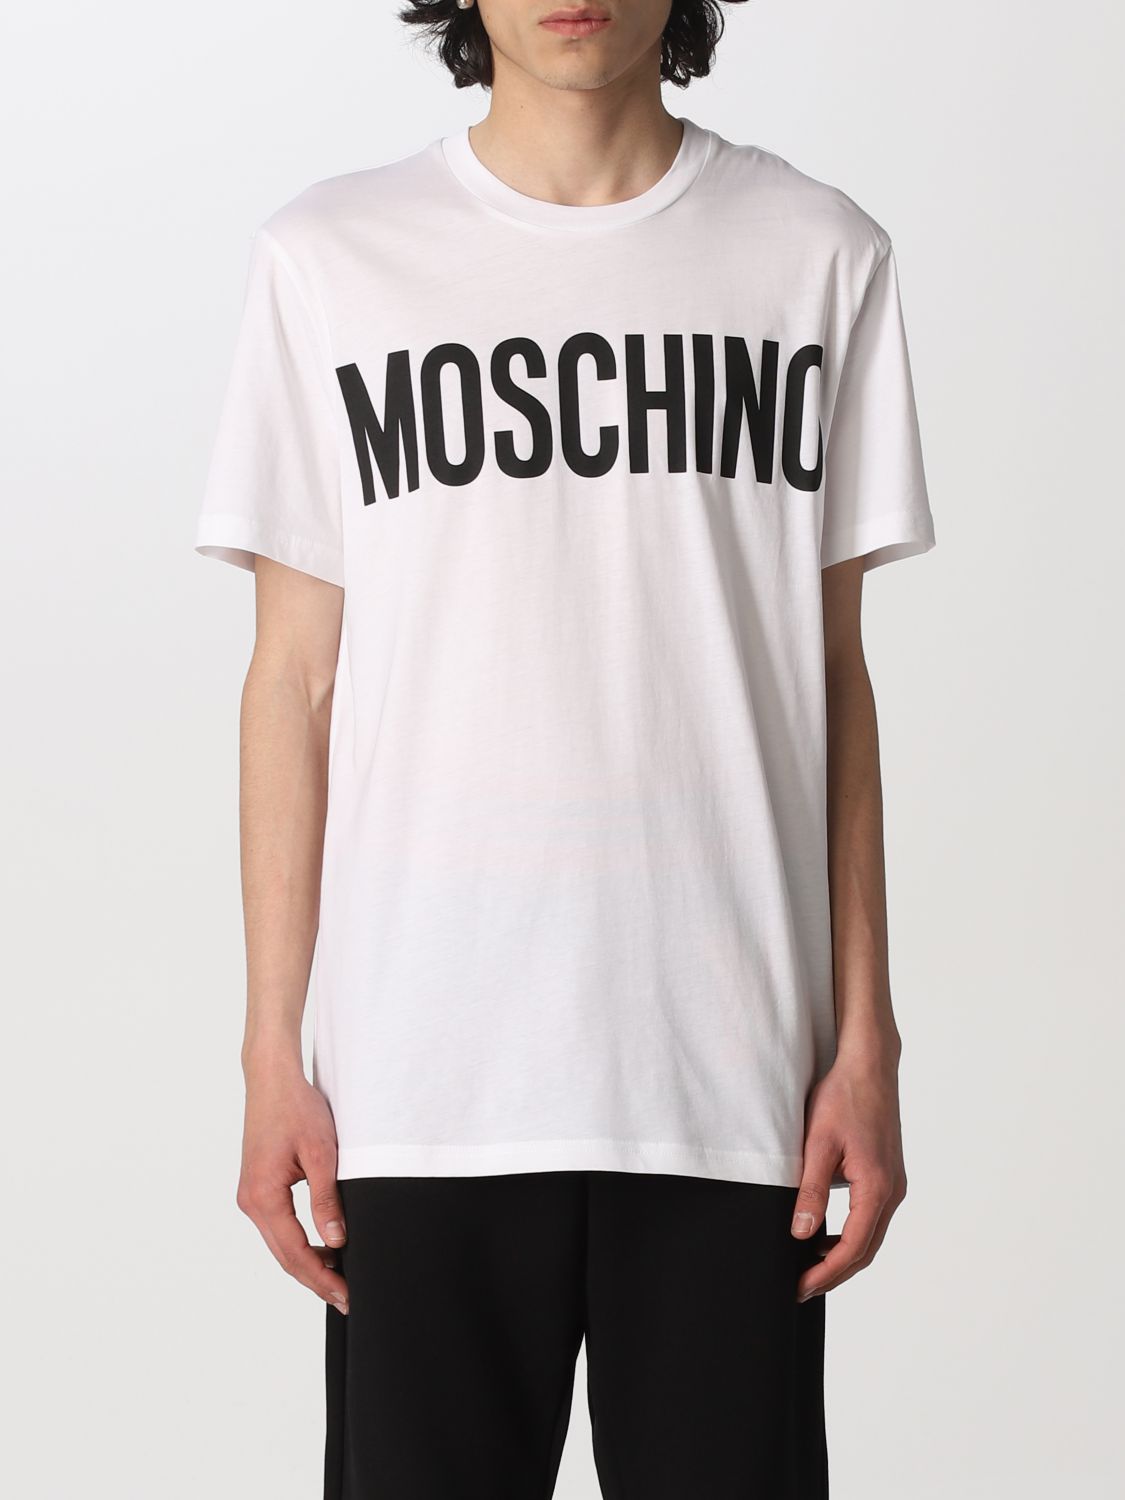 MOSCHINO COUTURE: cotton t-shirt with logo - White | Moschino Couture t ...